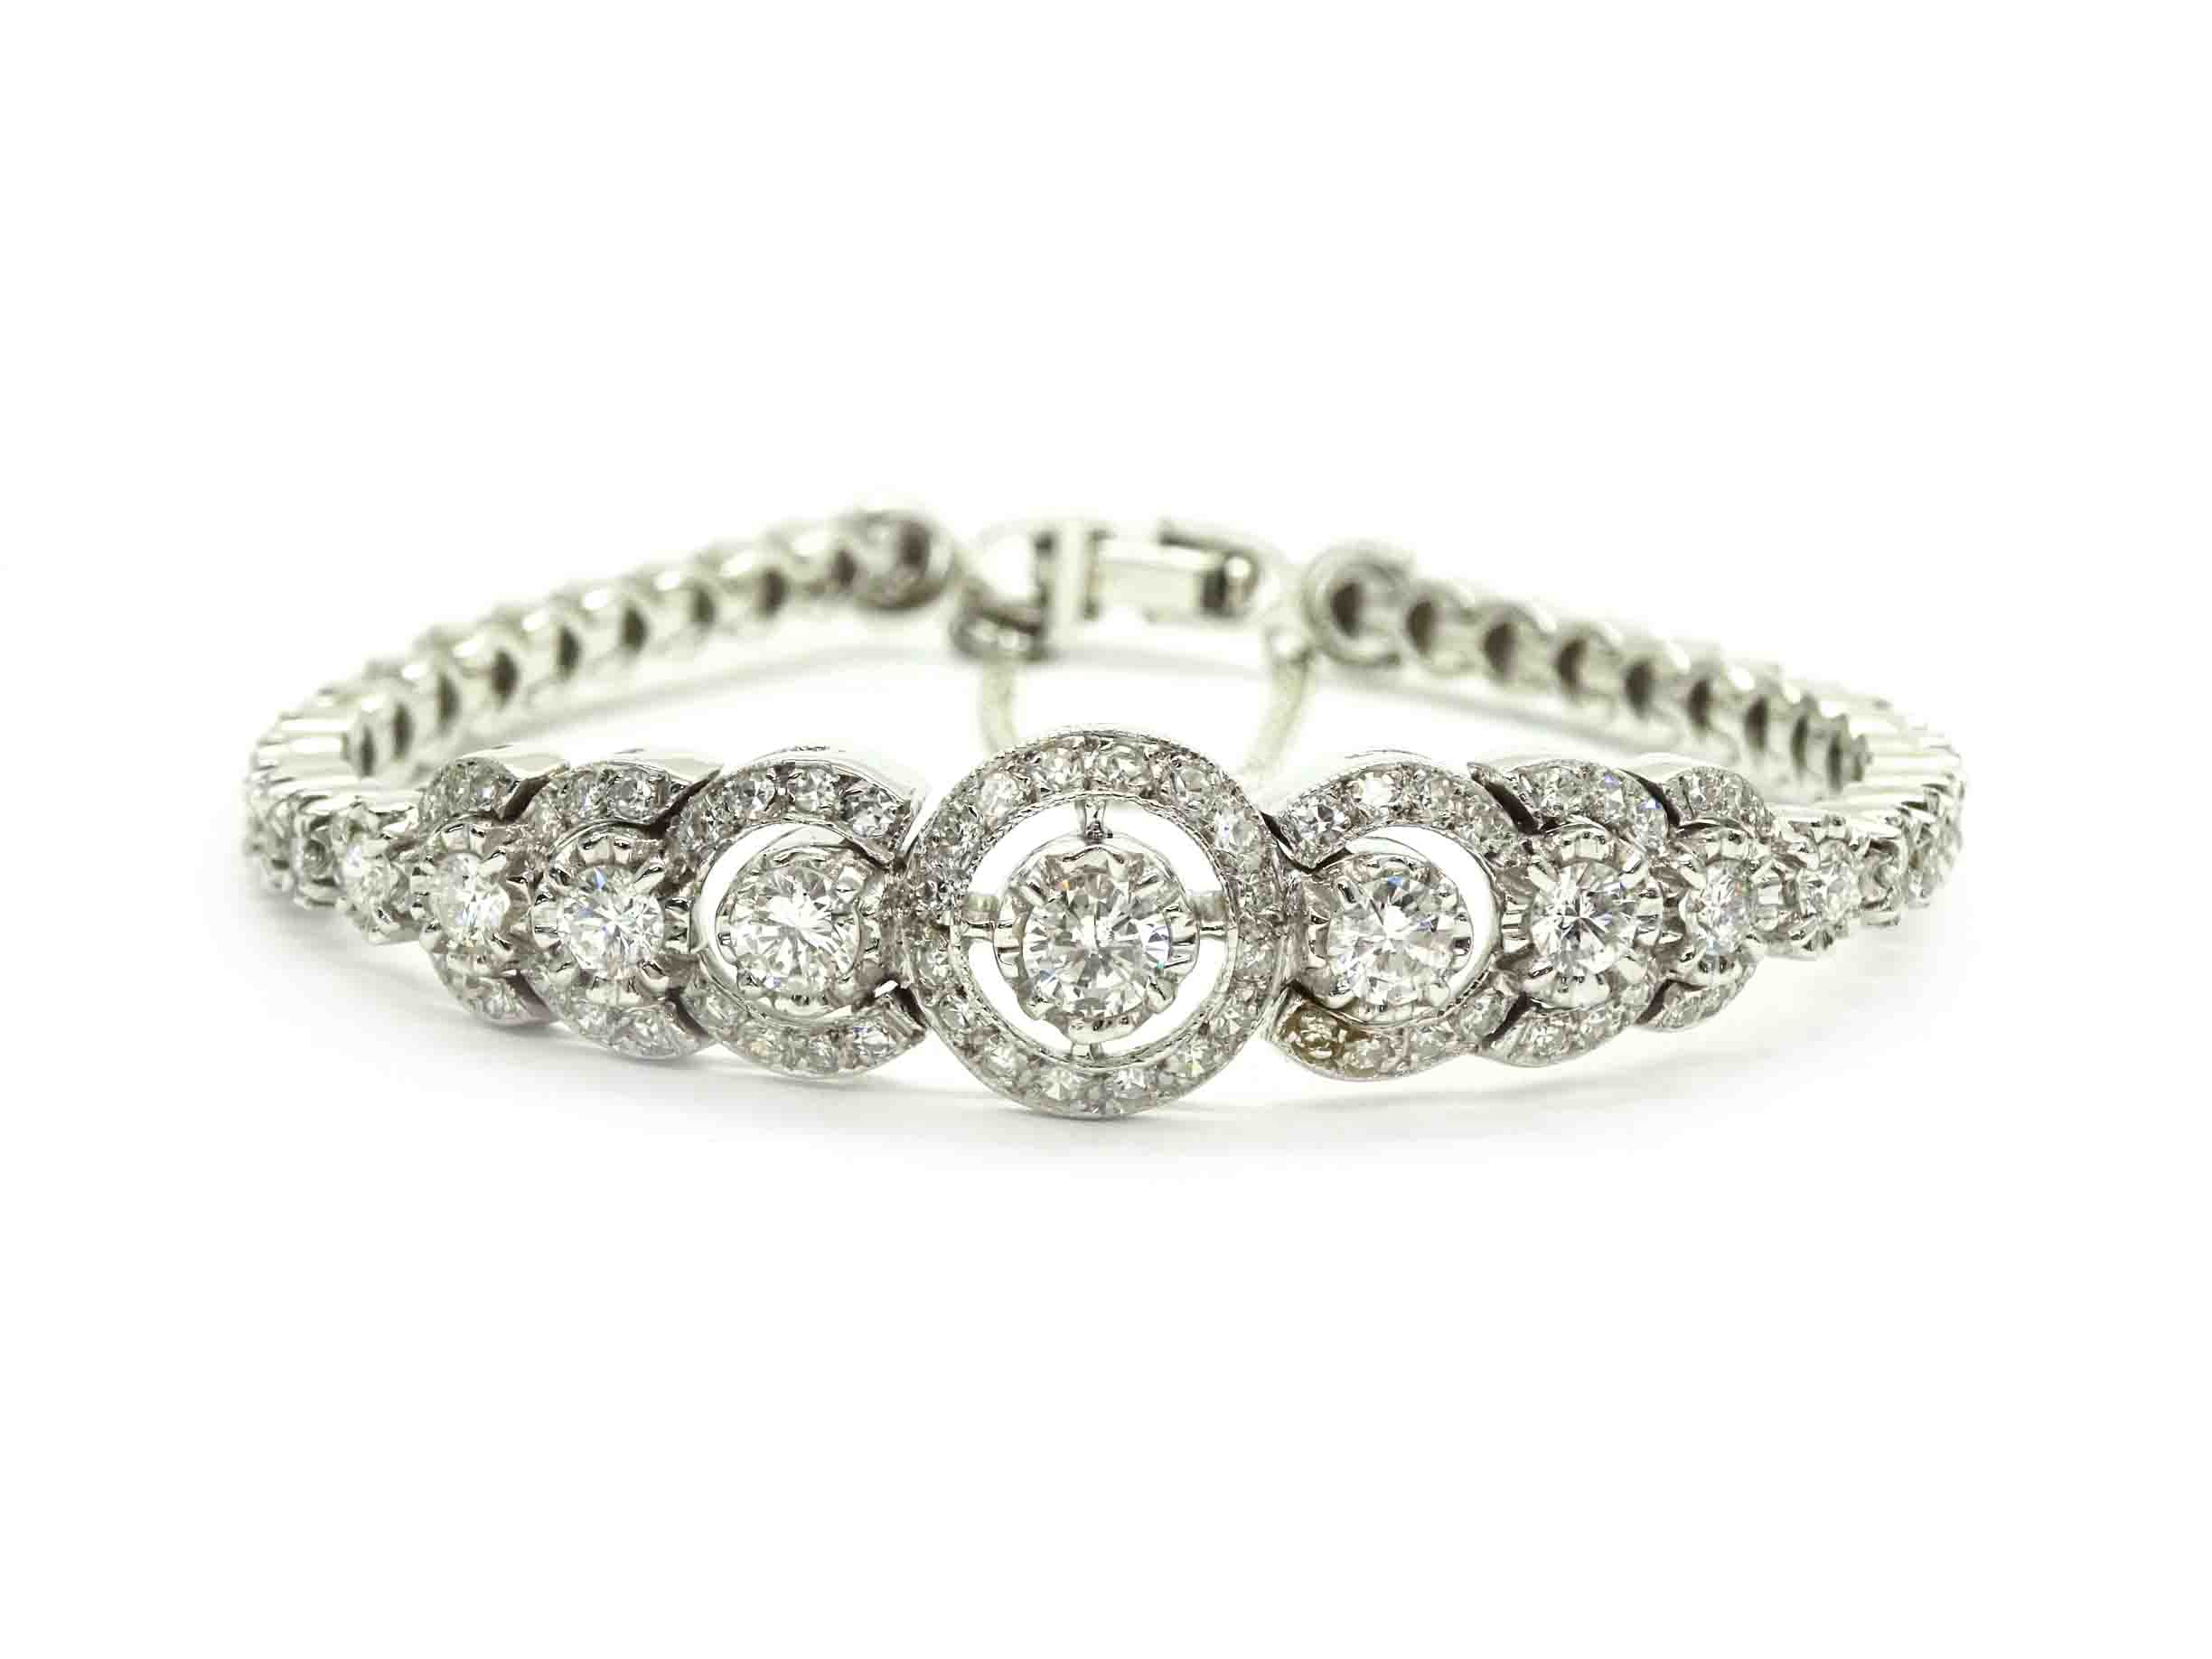 Helzberg 1.50ct Radiant Star Cut Diamond Engagement Ring 14k White Gold  Size 5 - Jewelry & Coin Mart, Schaumburg, IL